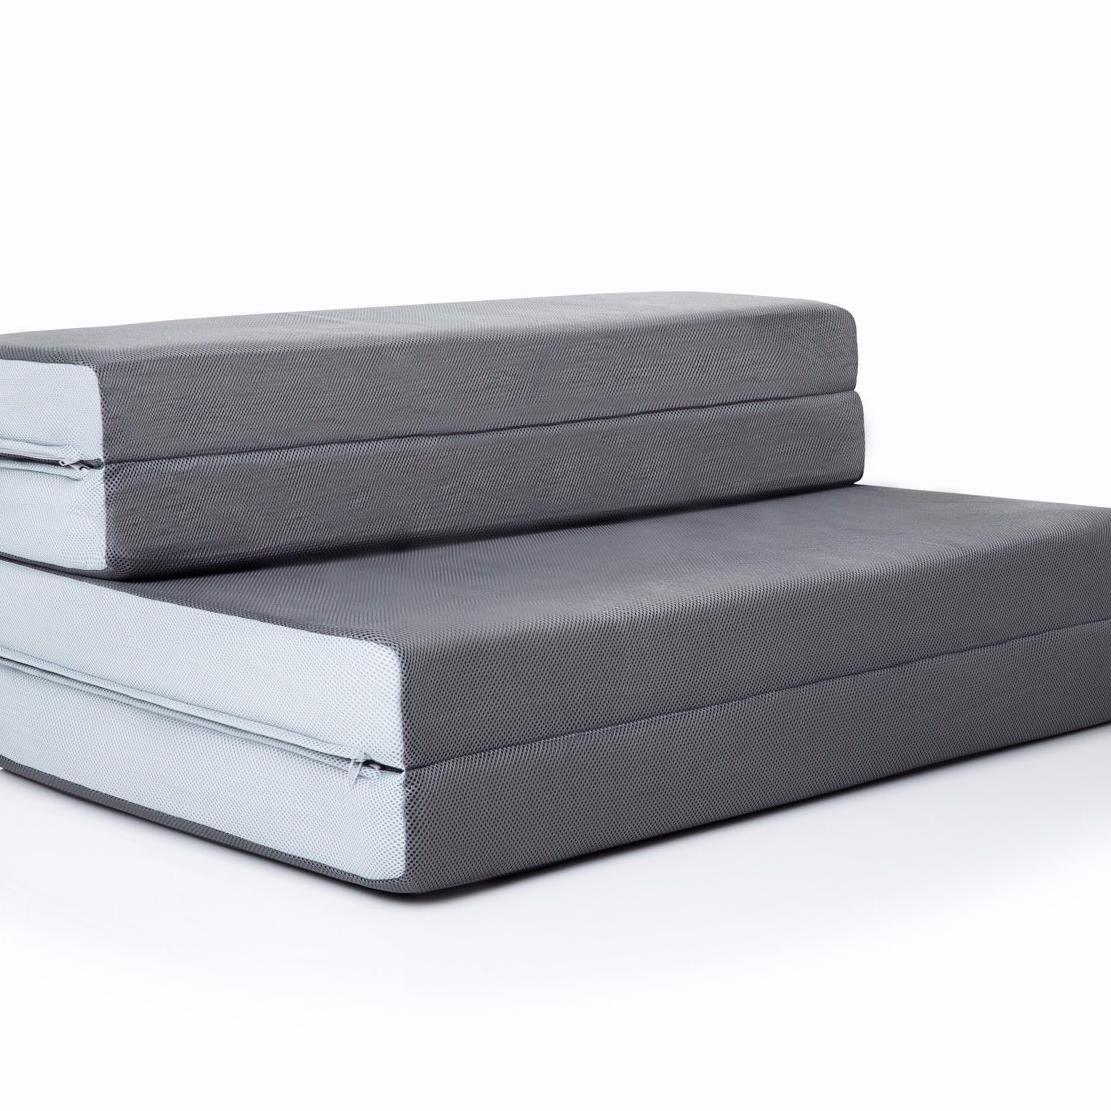 We know foldable mattresses better than anyone else!